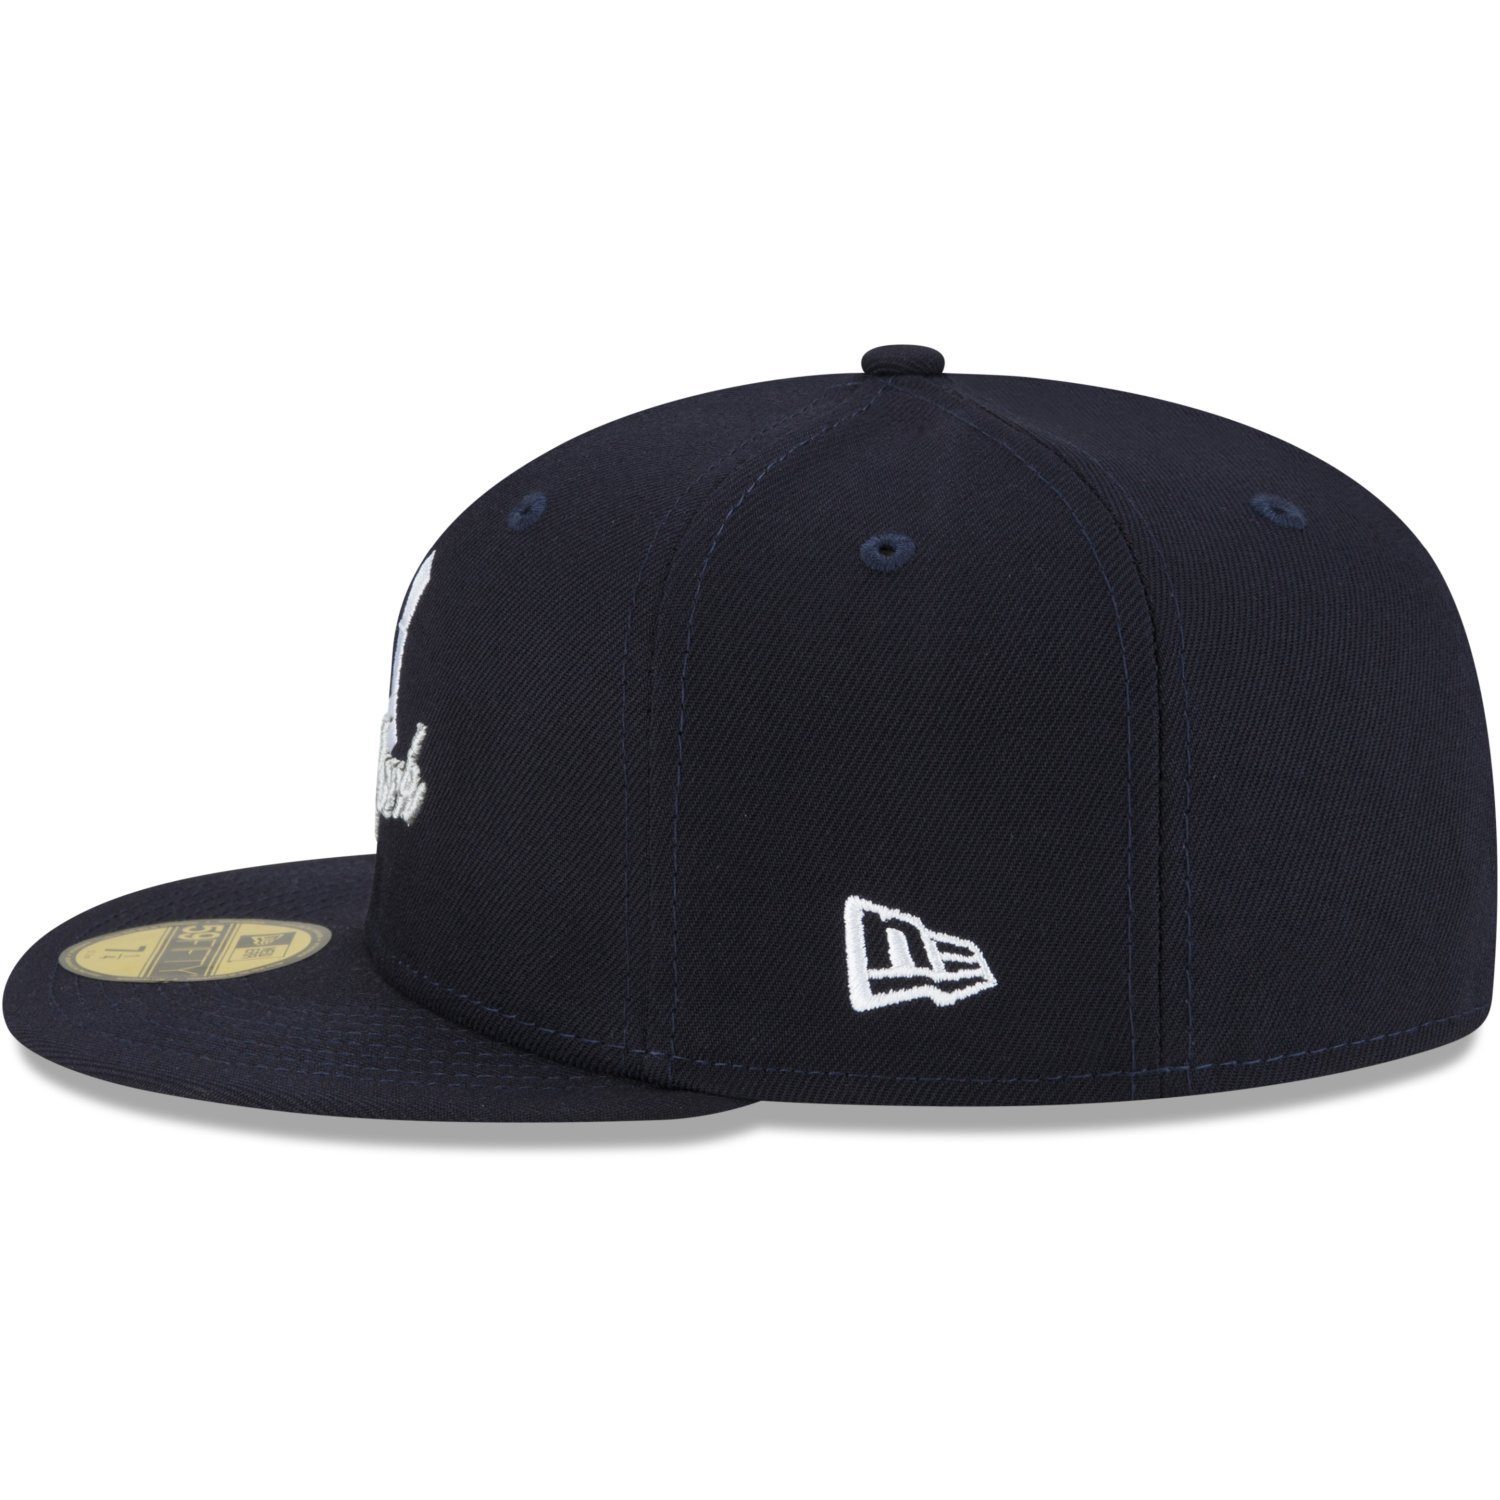 DUAL New New York Yankees LOGO Cap Era Fitted 59Fifty